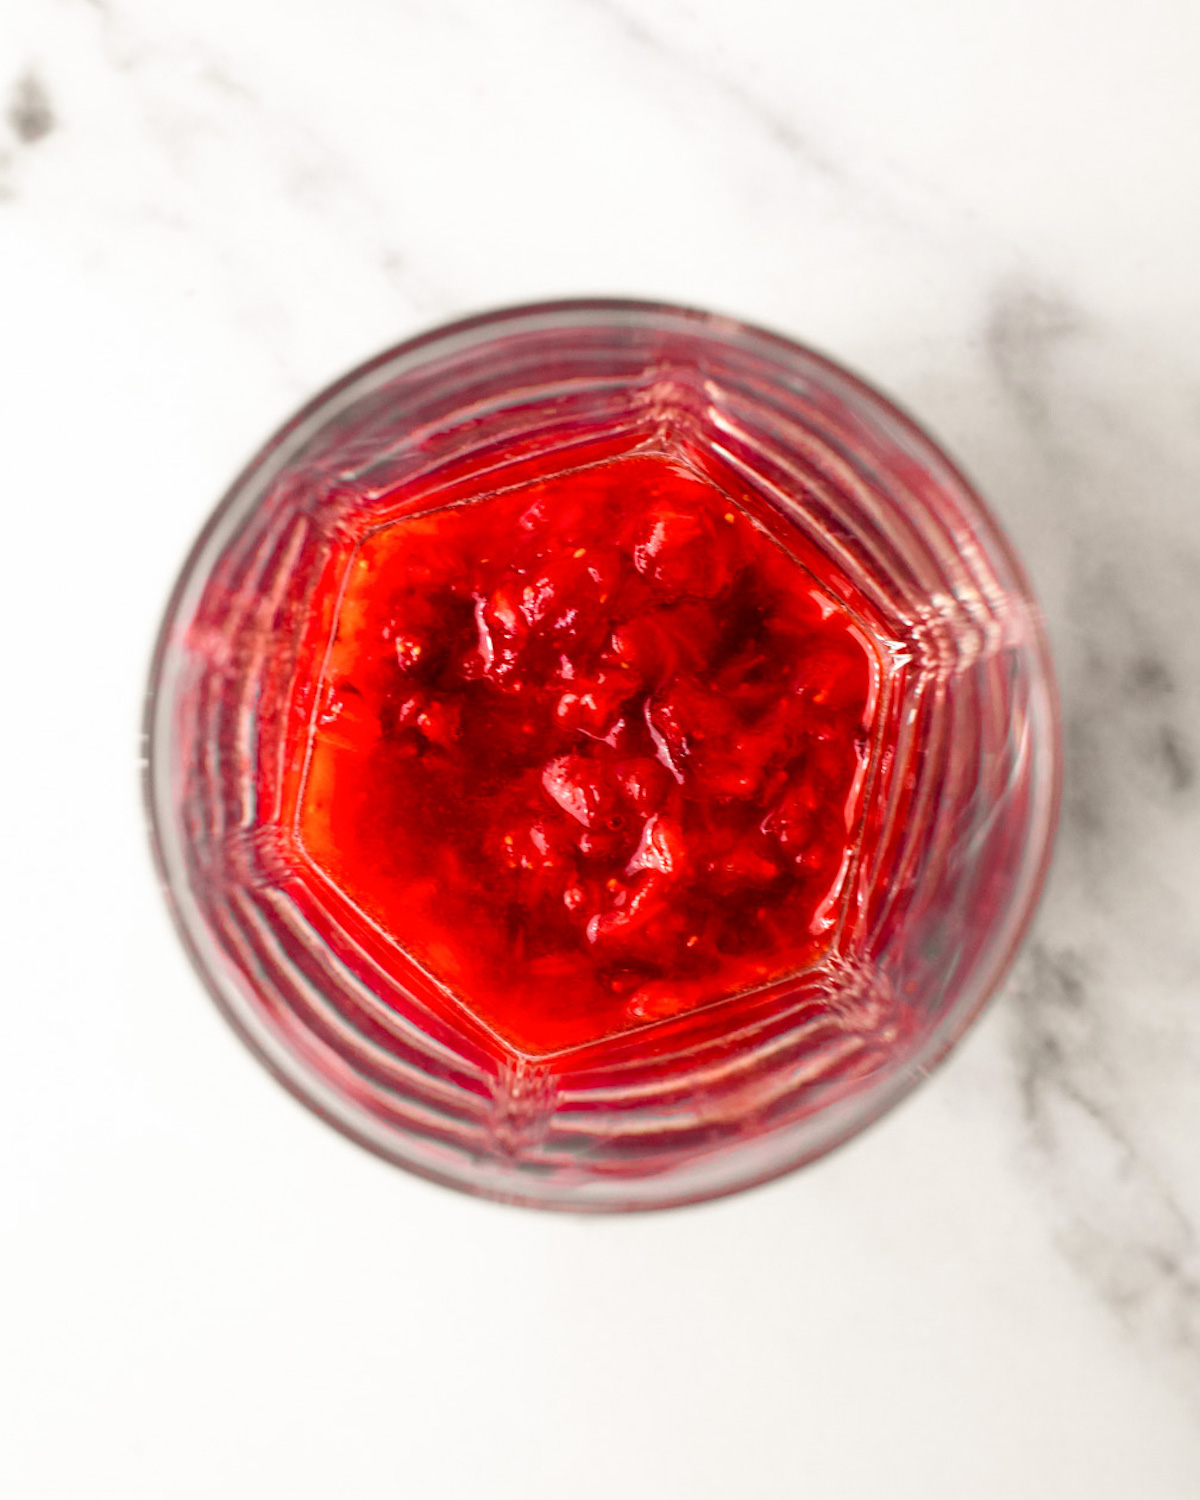 An overhead shot of strawberries muddled in a glass.